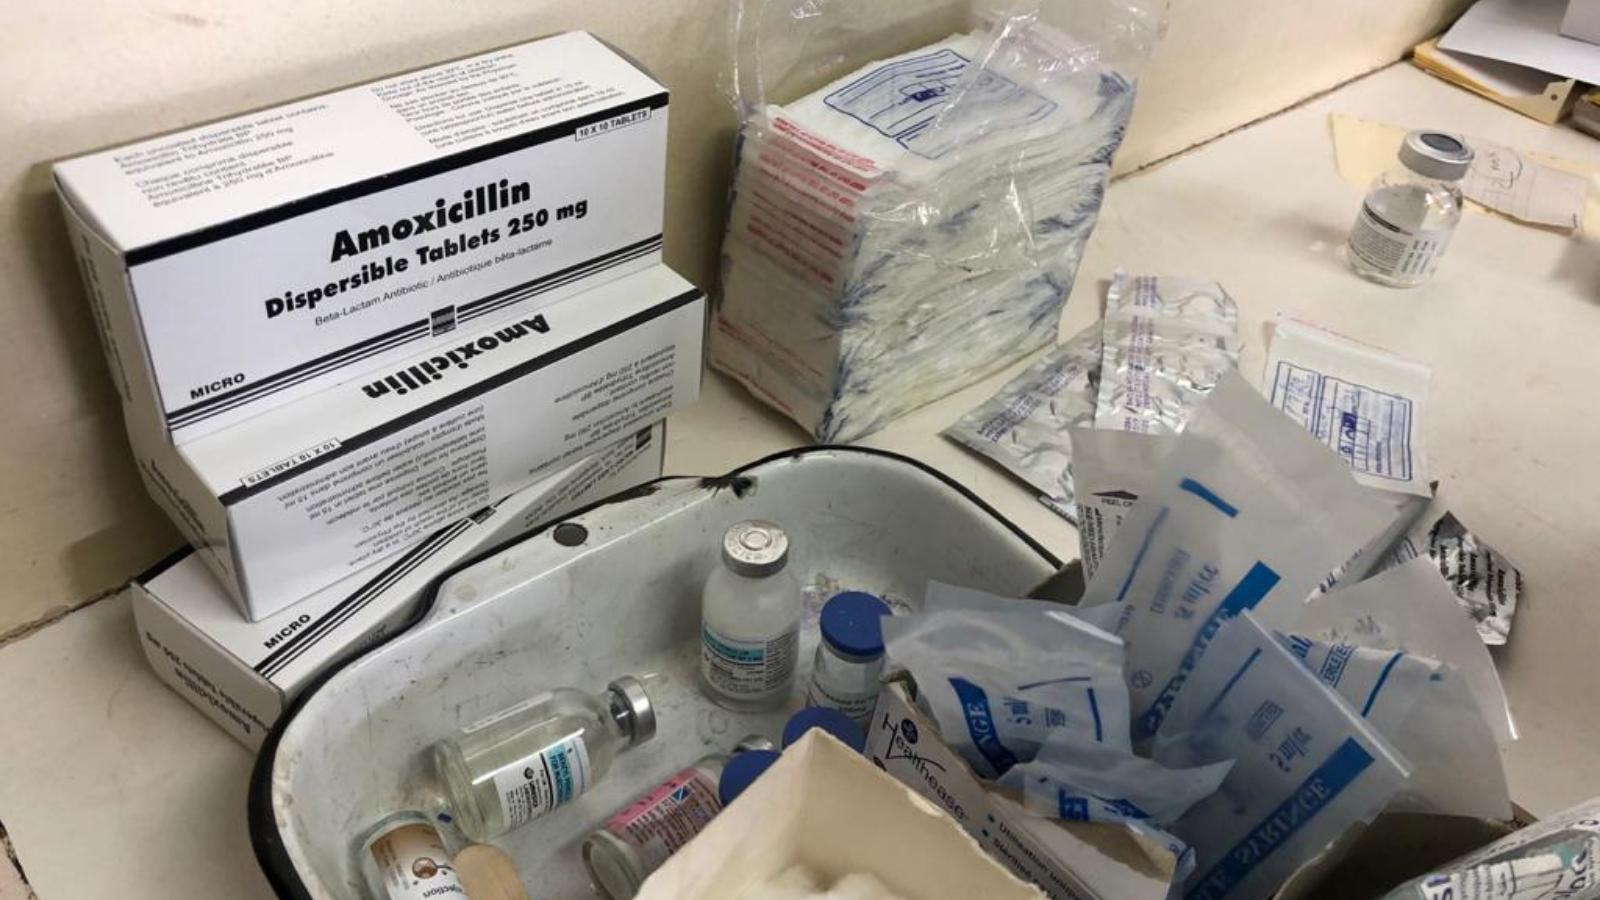 Boxes of antibiotics, vials and medical equipment on top of a table.